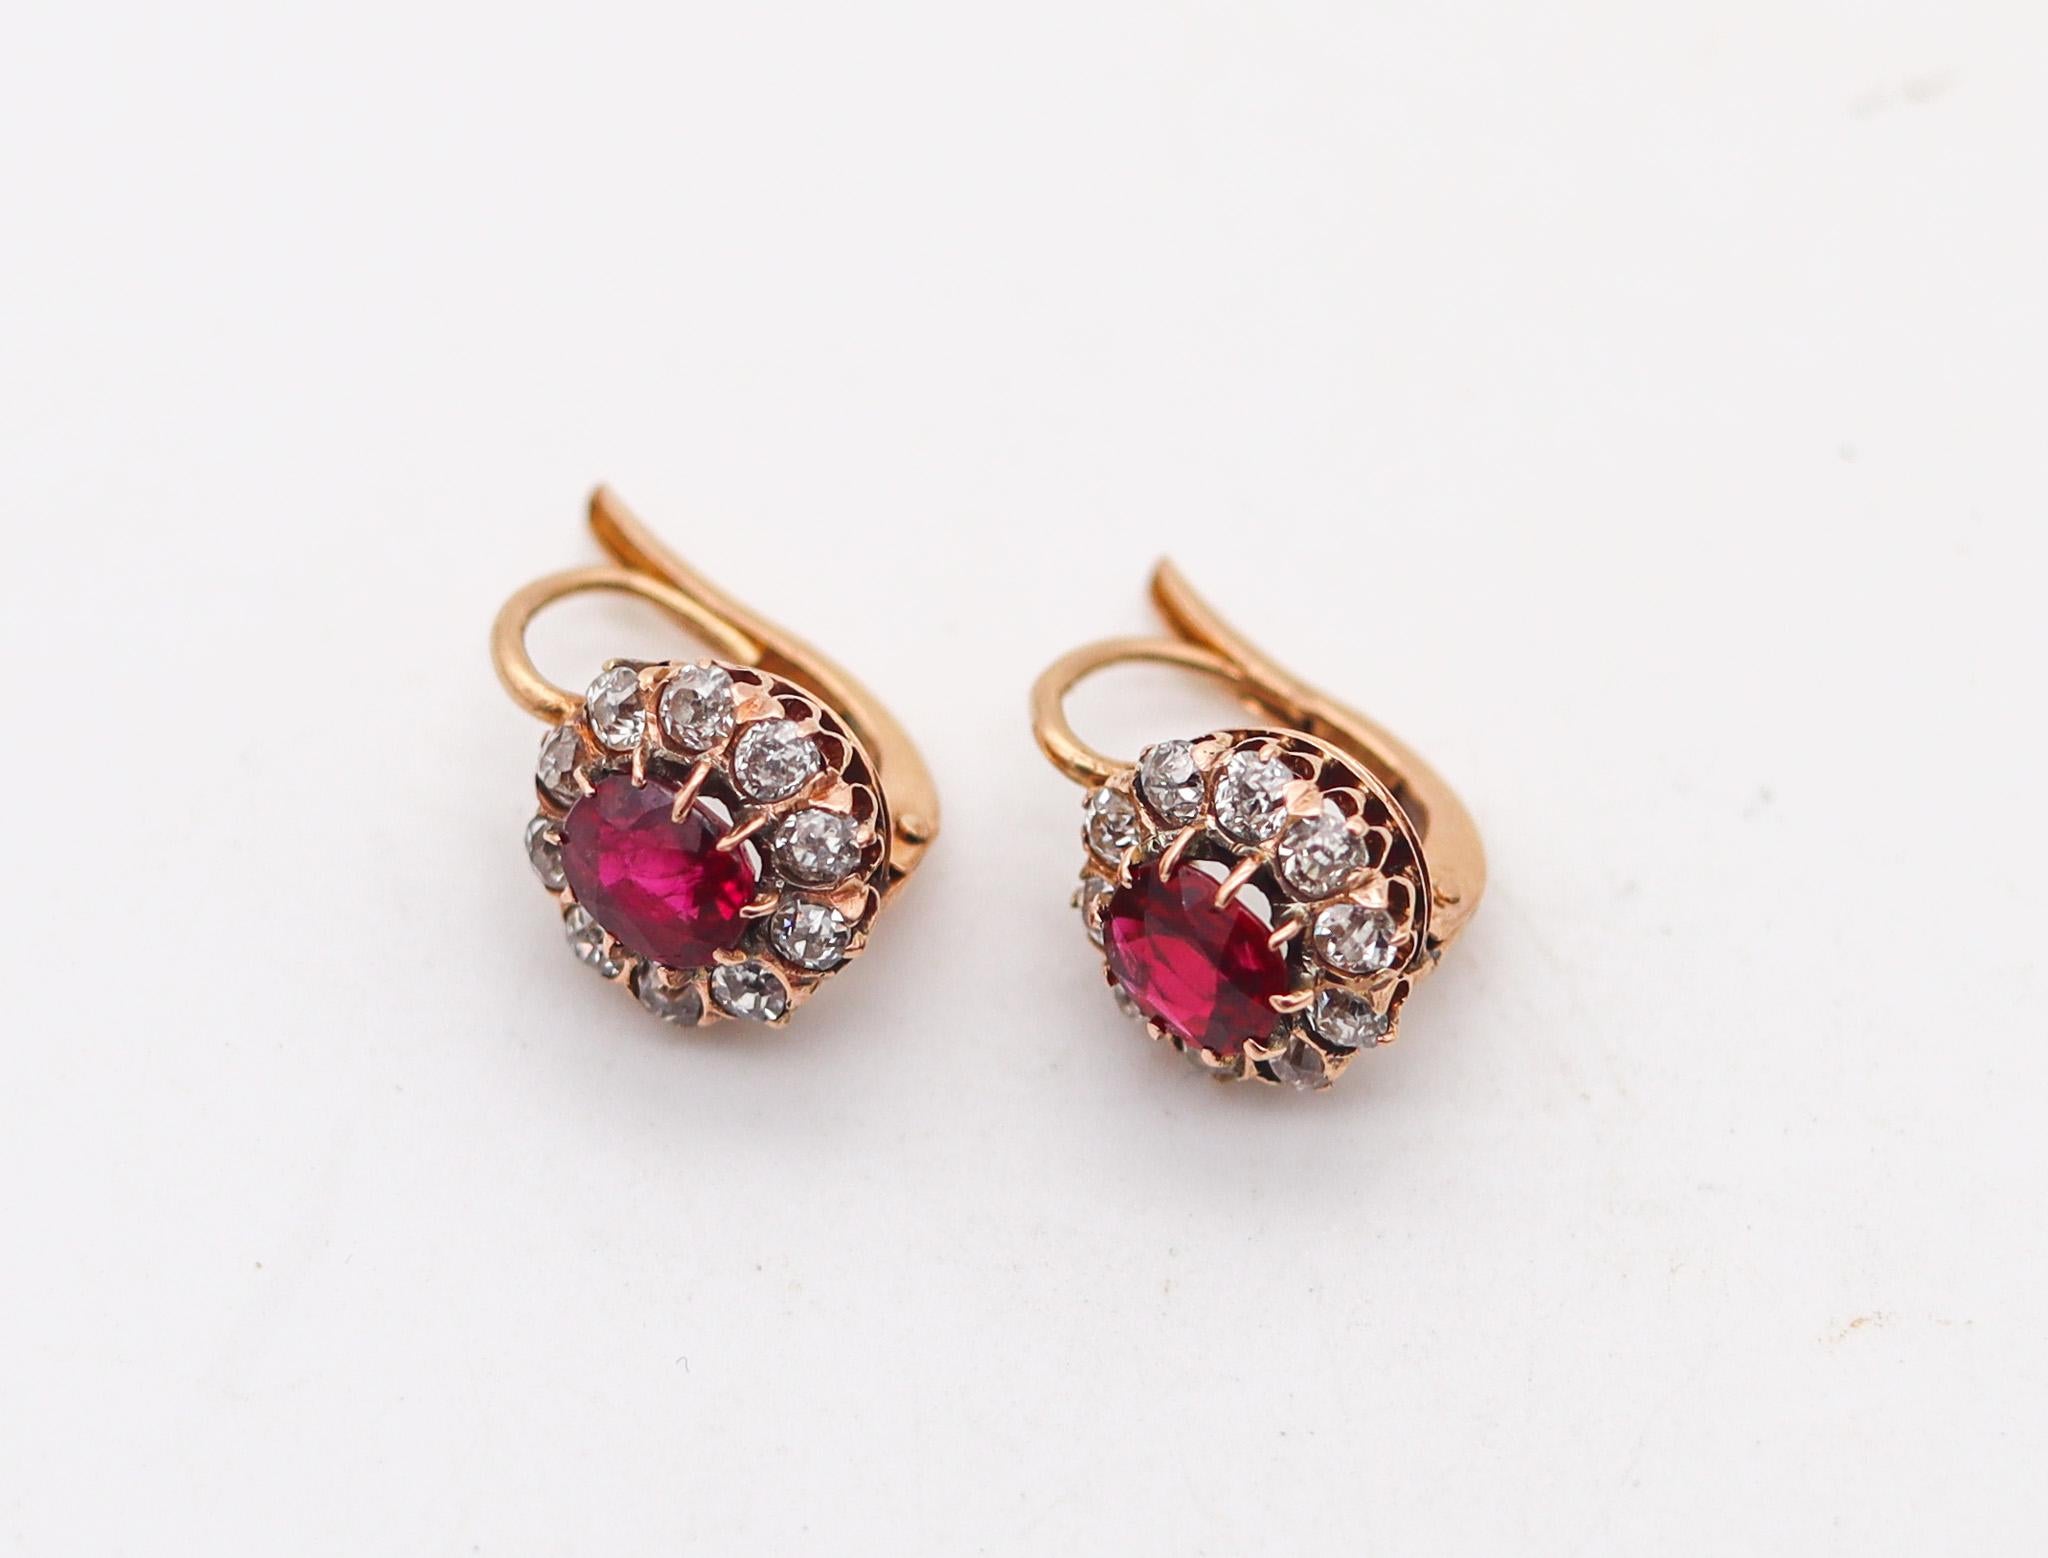 Old European Cut Edwardian 1905 Antique French Earrings 18Kt Gold With 3.54 Ctw Diamonds & Rubies For Sale